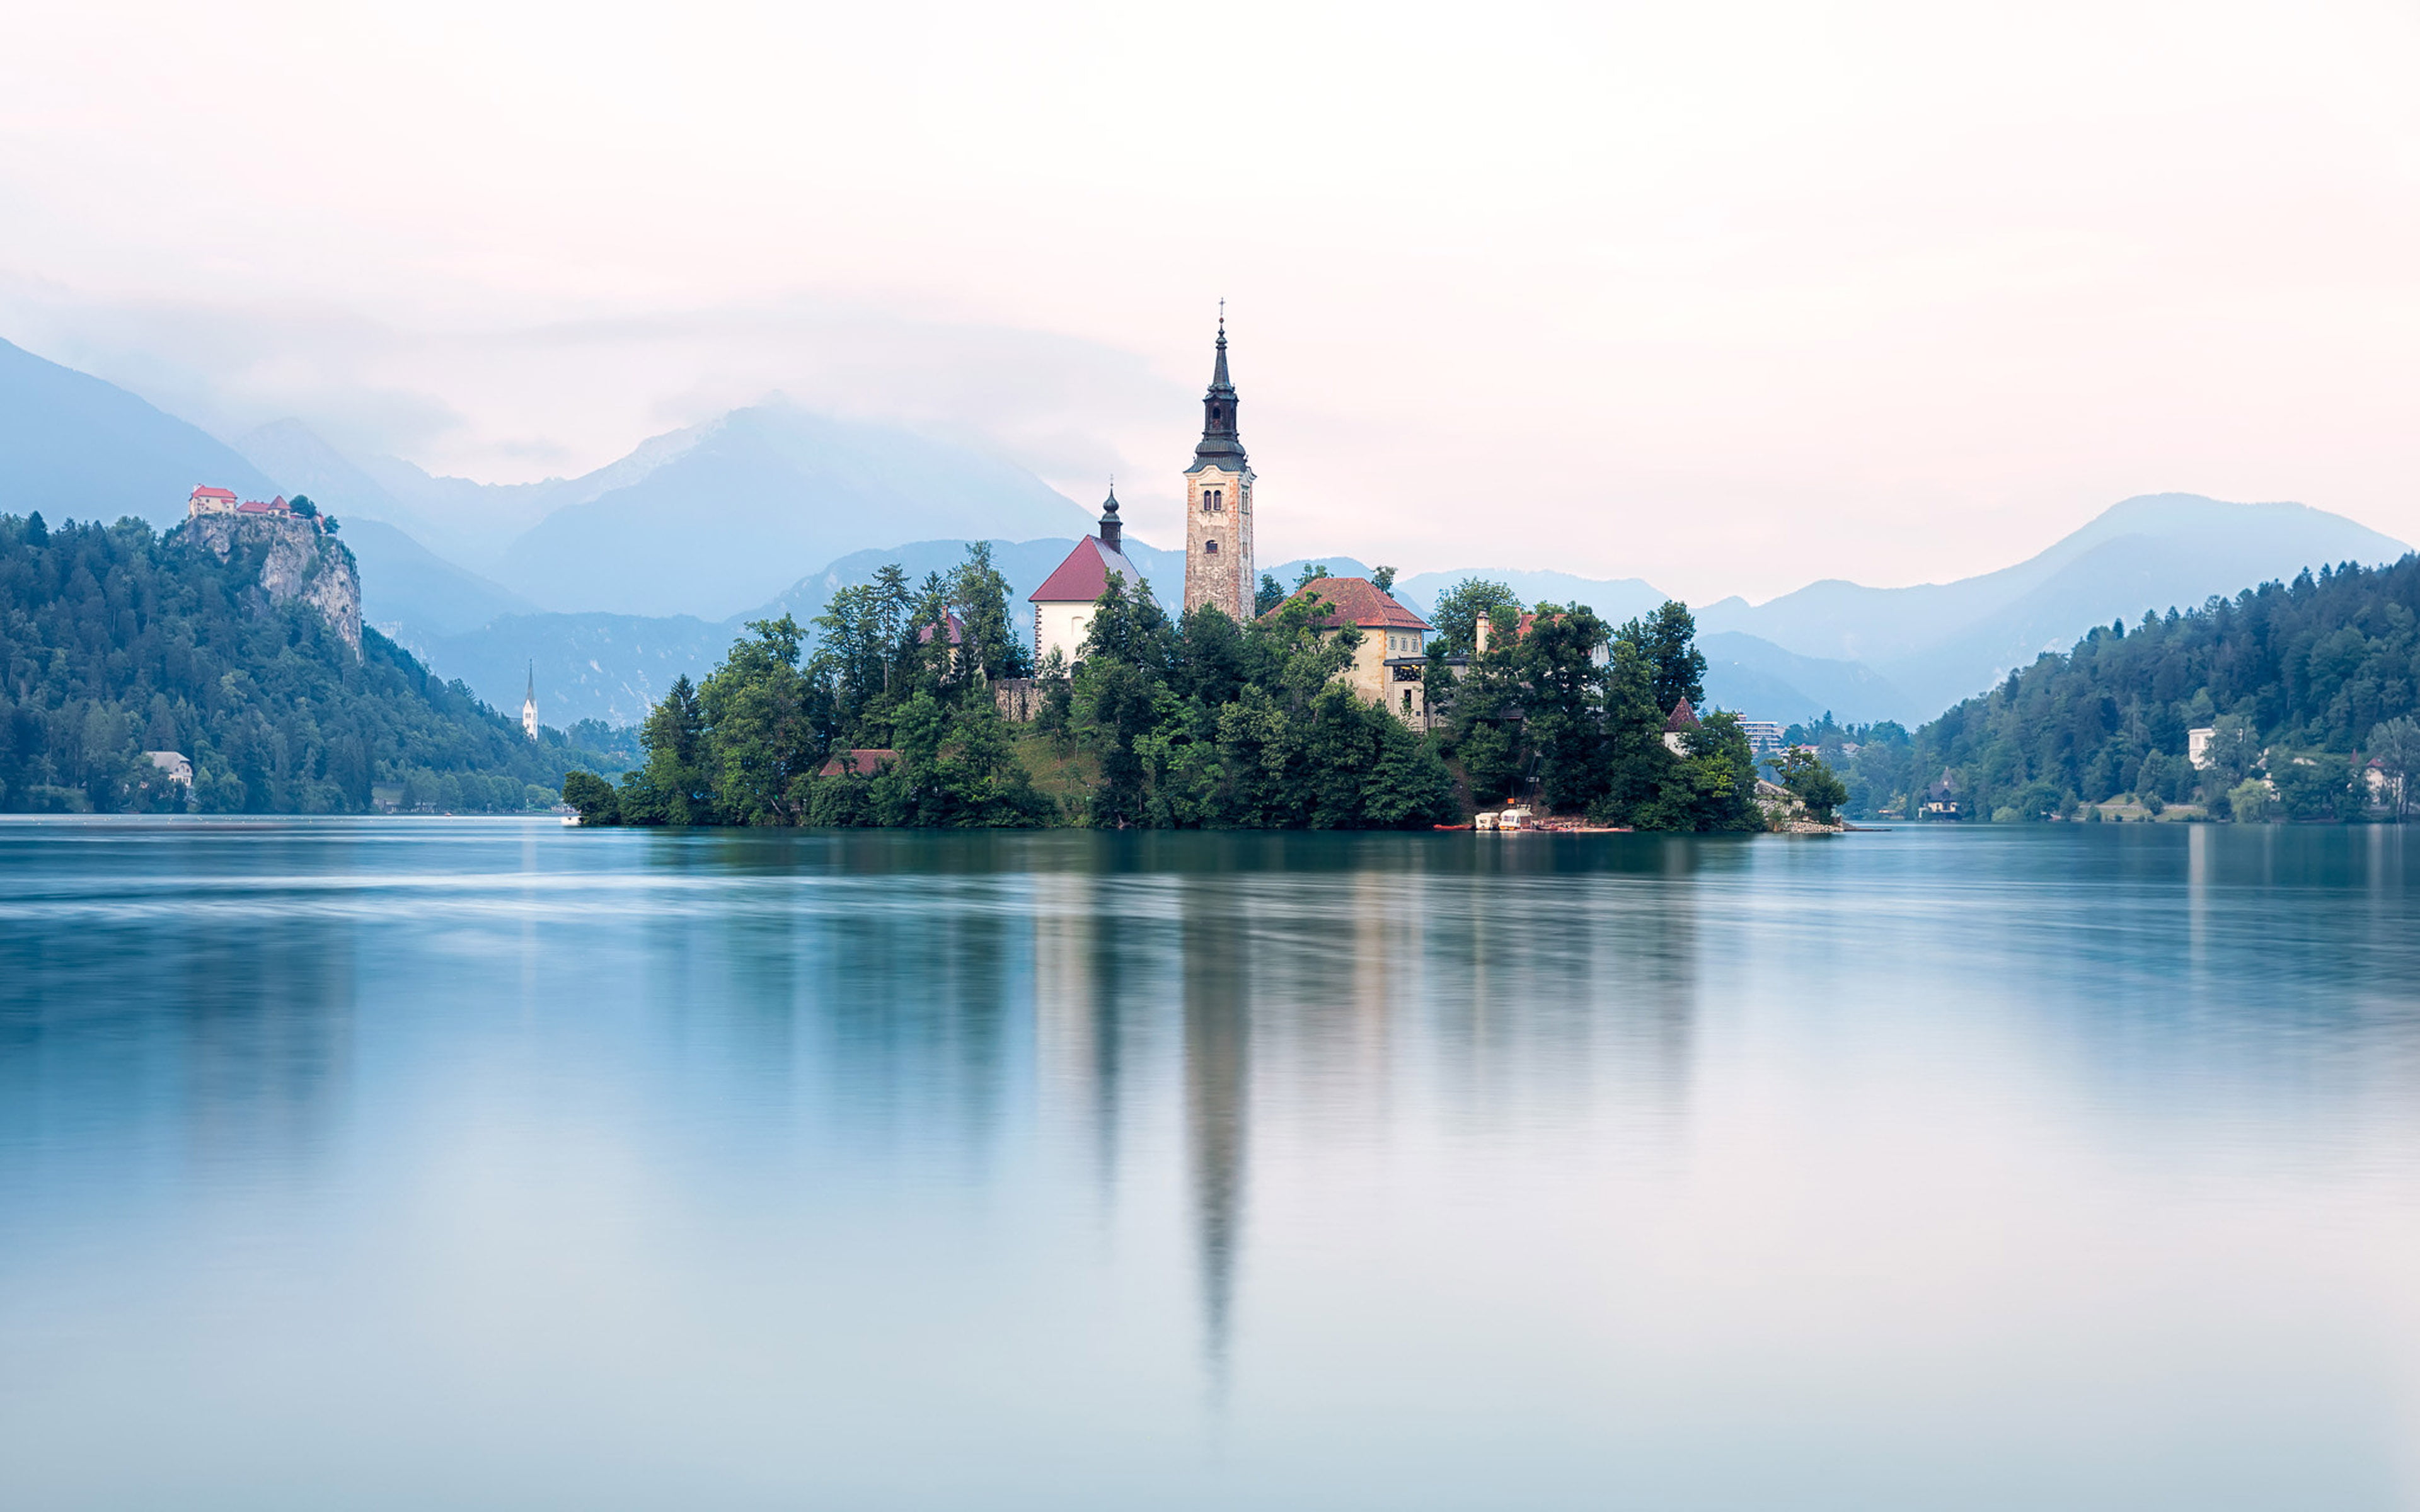 Lake Bled Near Capital Ljubljana In Slovenia Island In The Lake Center From The 17th Century Ultra Hd Wallpapers For Desktop Mobile Phones And Laptop 3840×2400